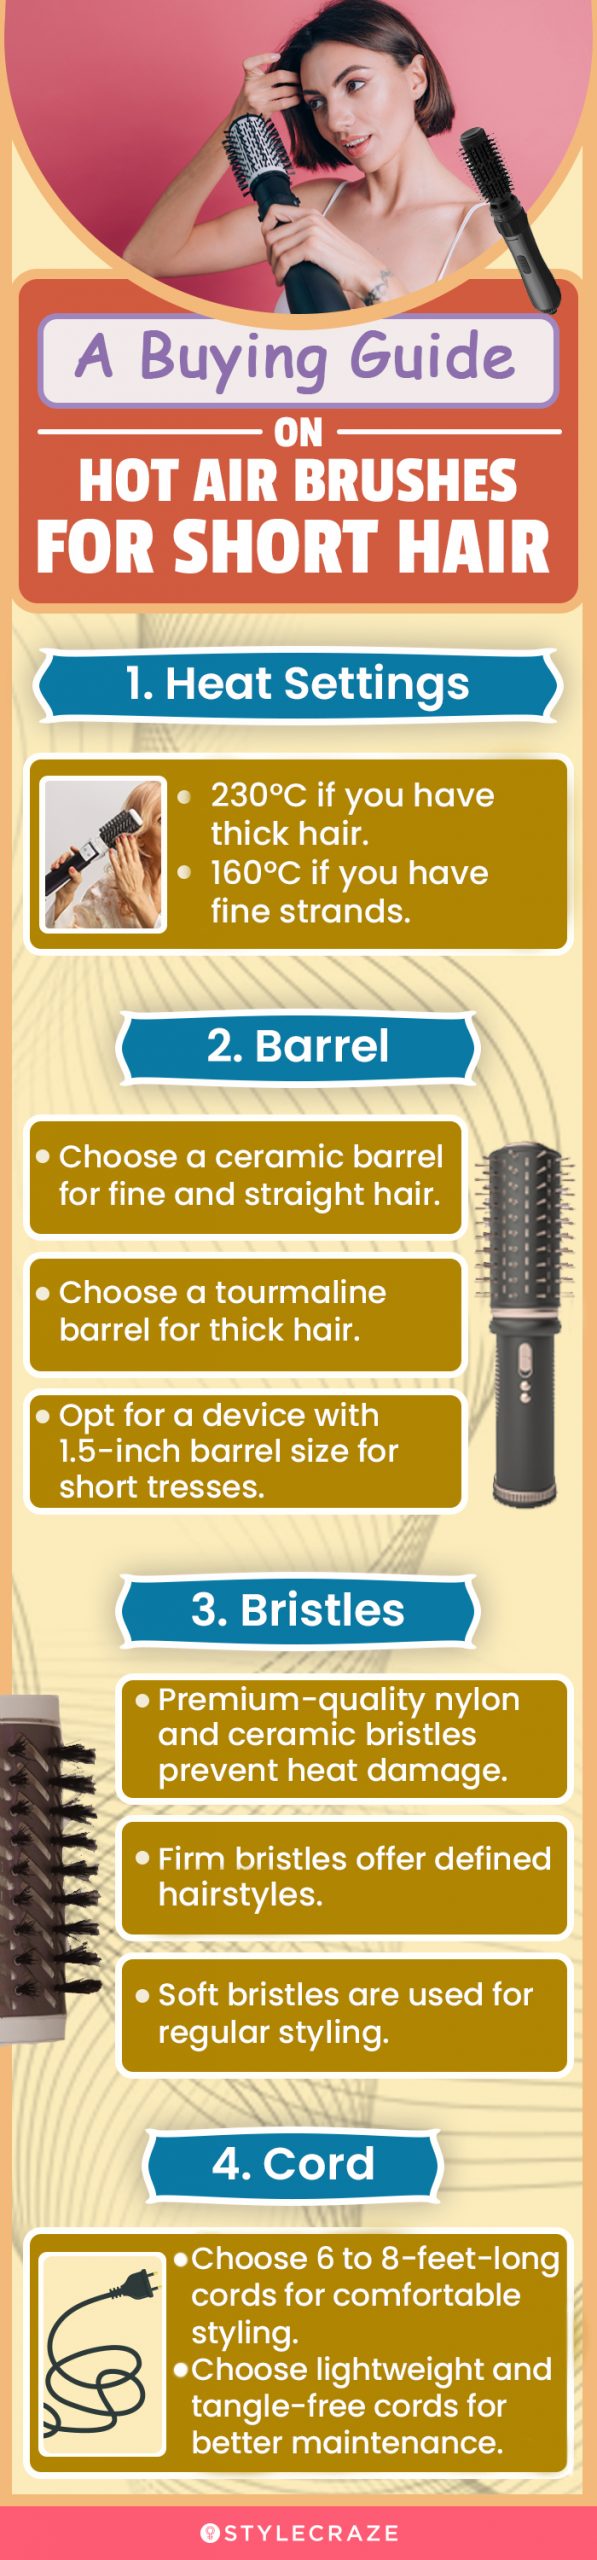 A Buying Guide On Hot Air Brushes For Short Hair